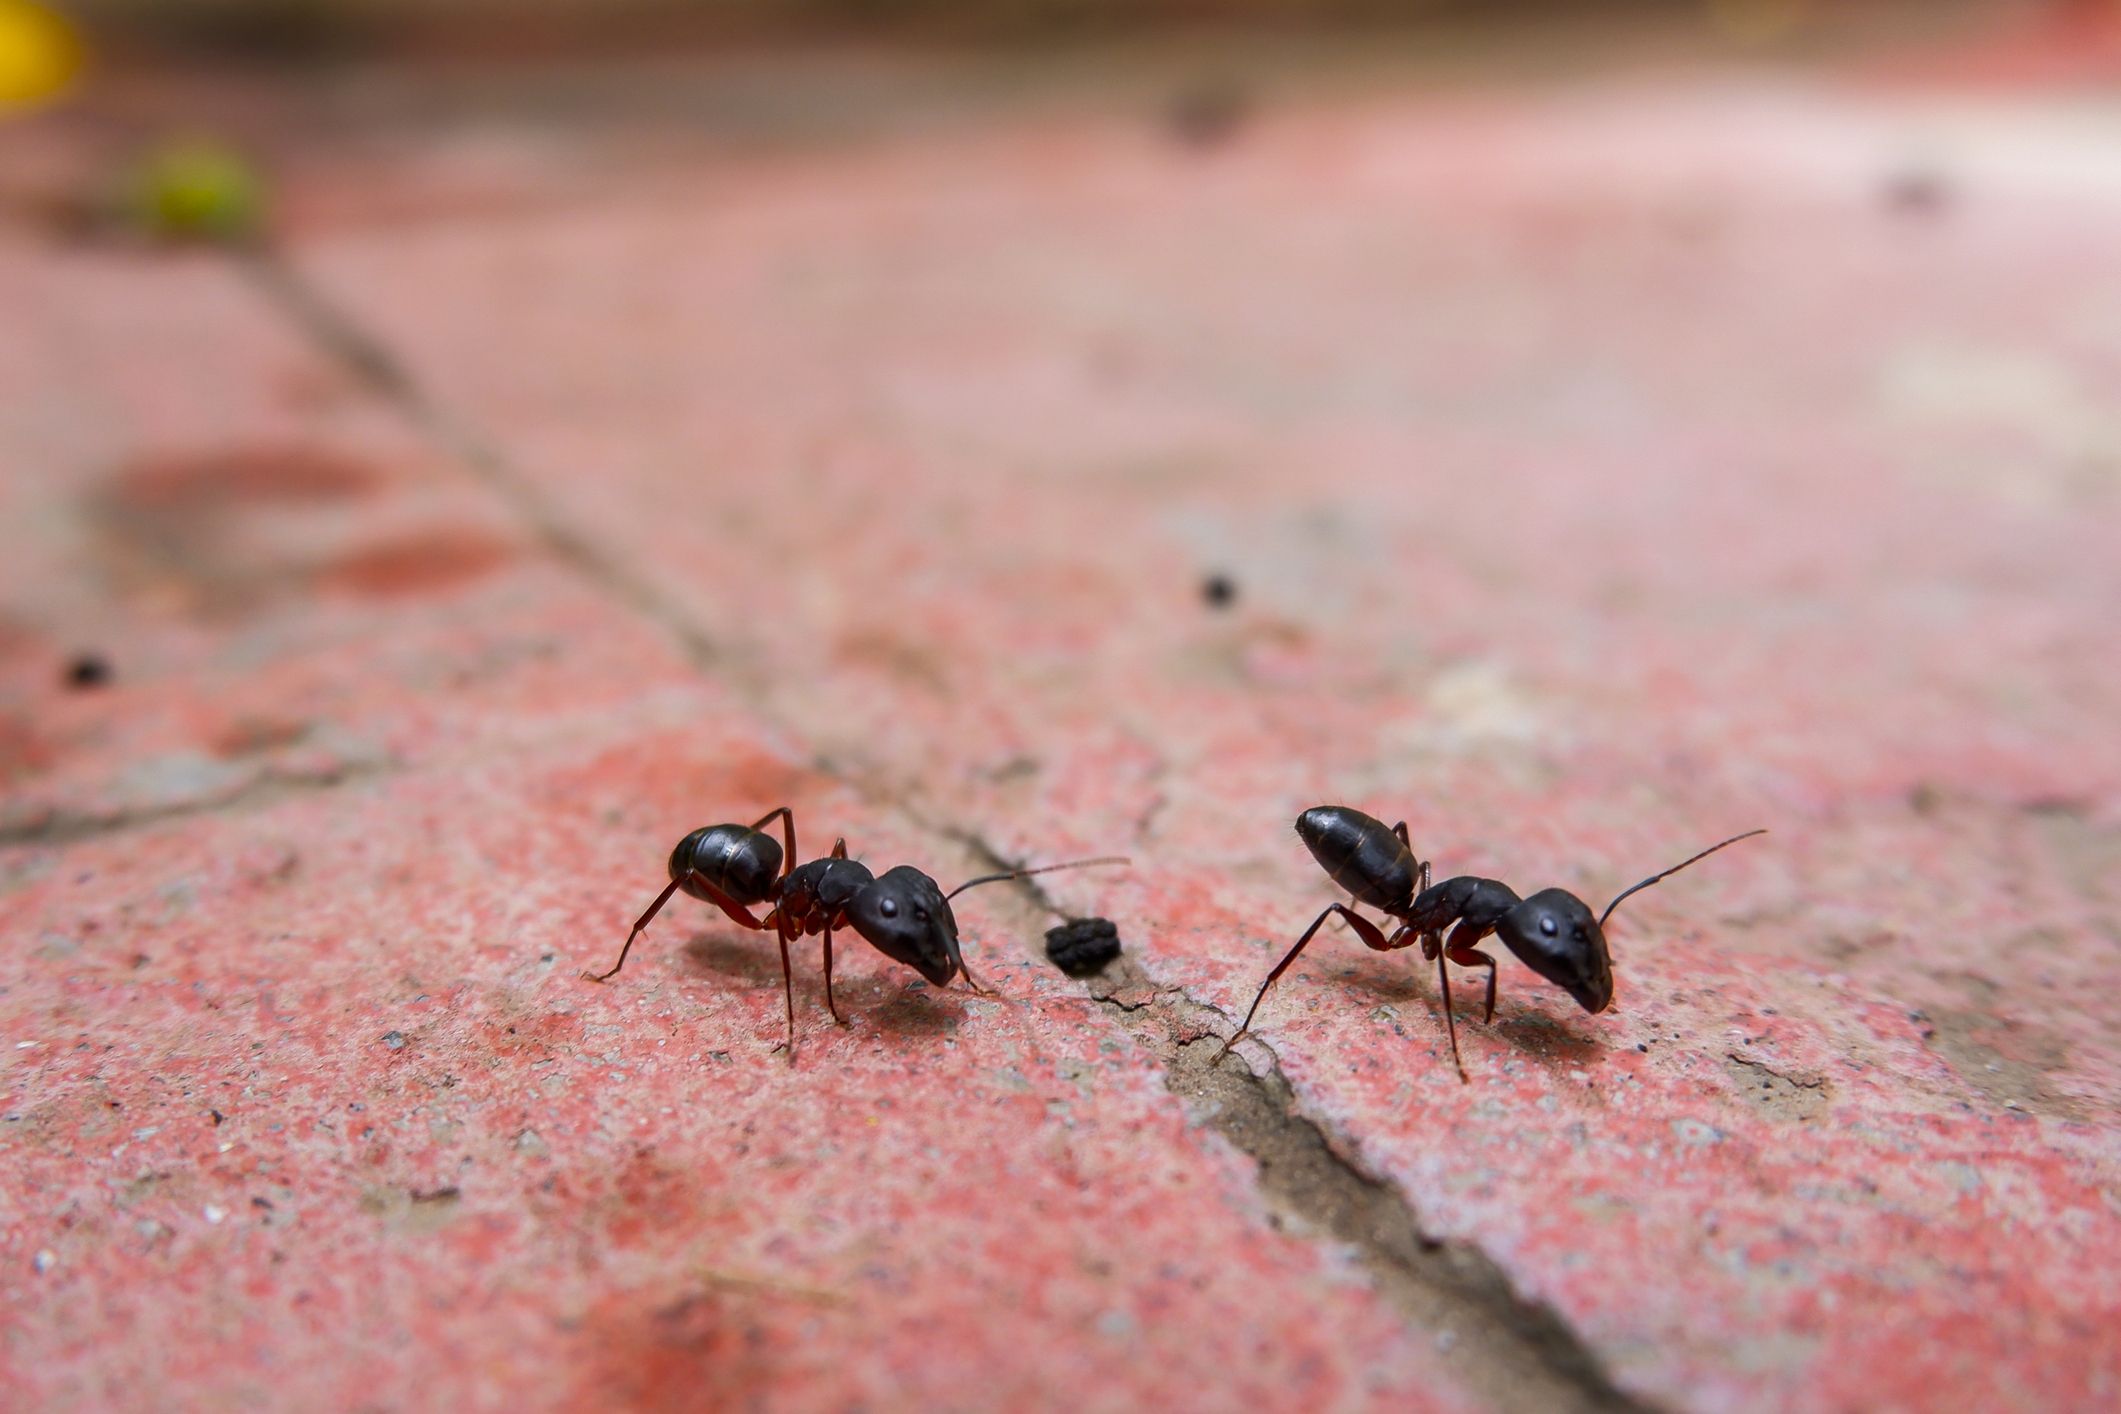 Reds Ants Vs Black Ants Top Differences And How To Kill Both,Cardamom Spice